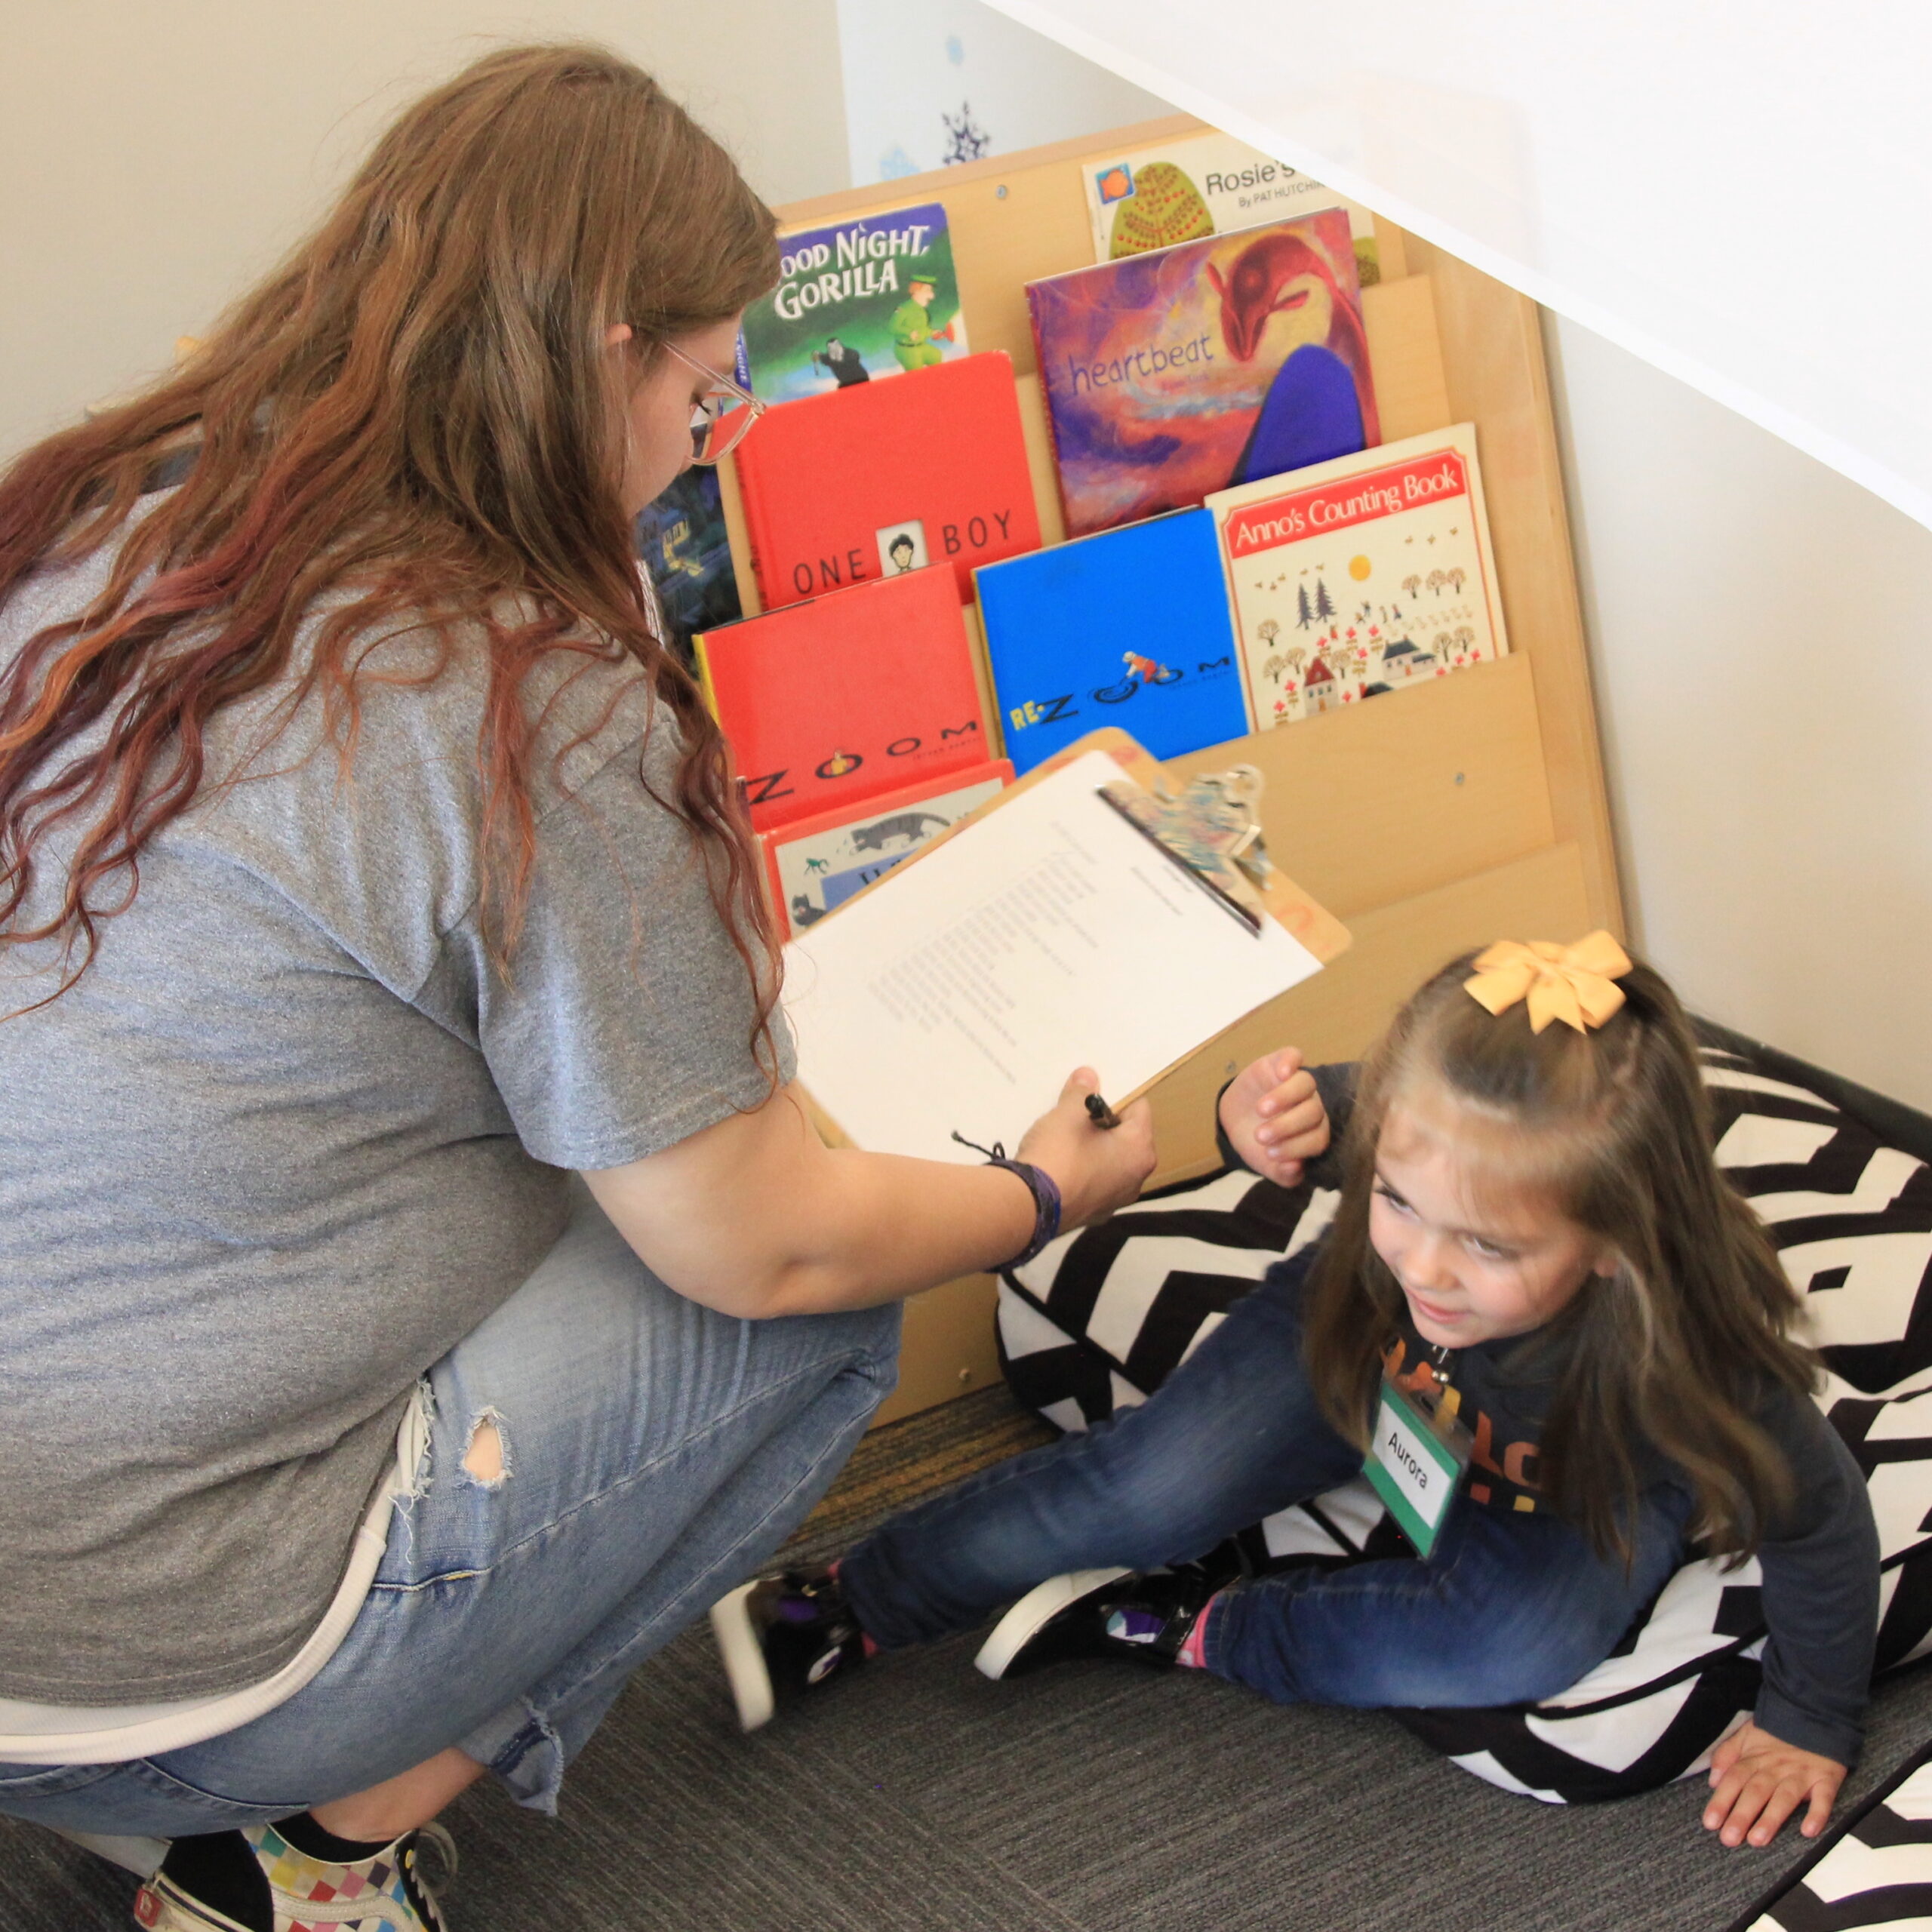 Student explores reading materials in the TK classroom